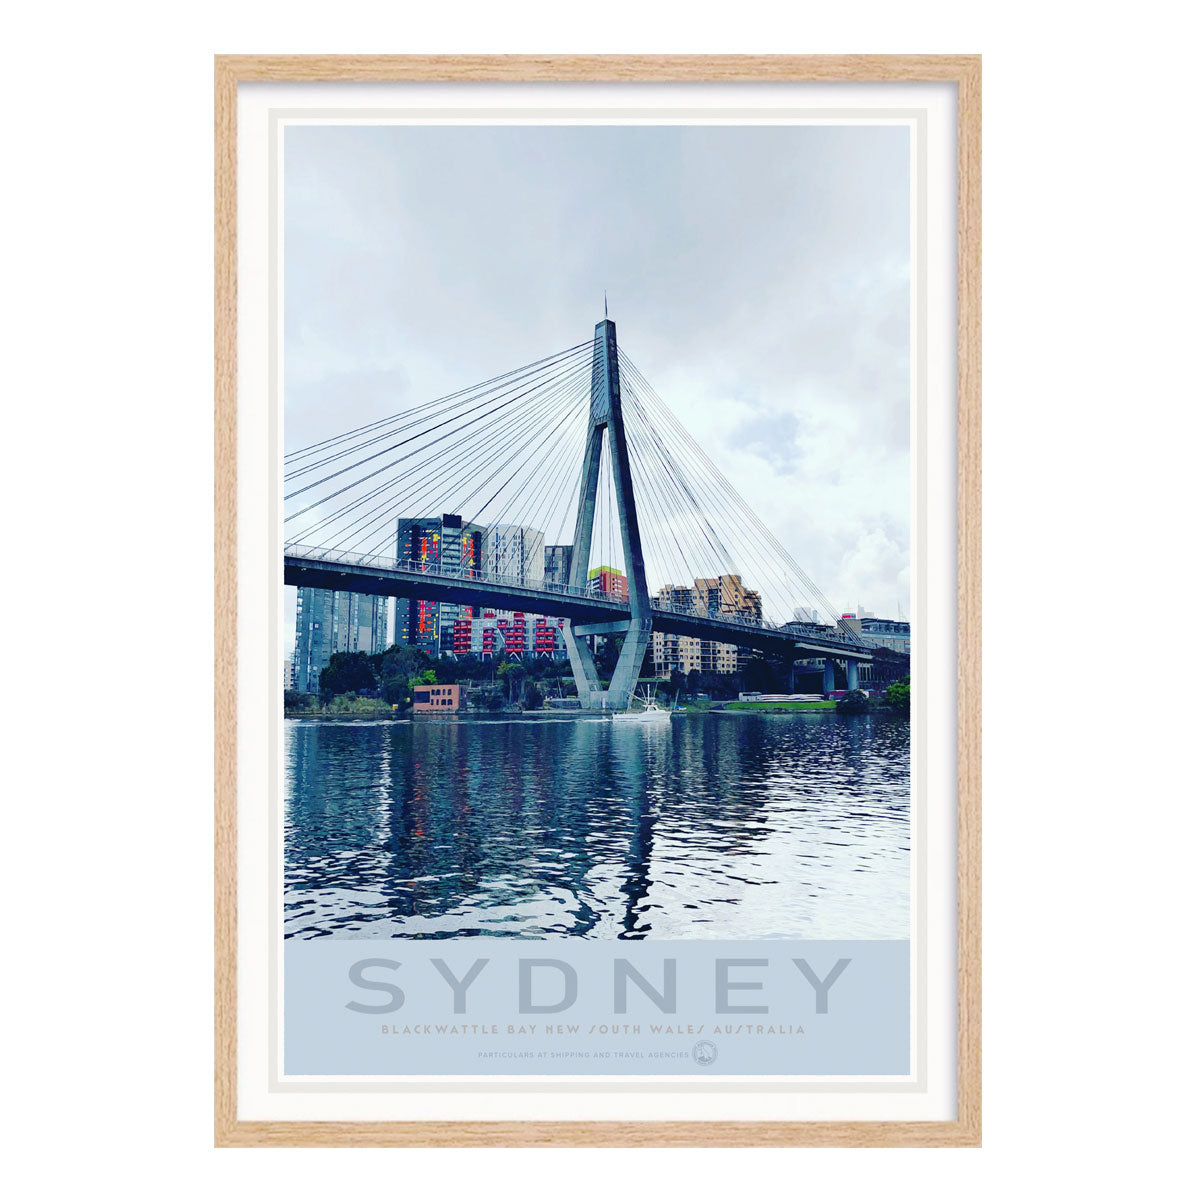 Sydney Australia vintage retro poster print in oak frame from Places We Luv